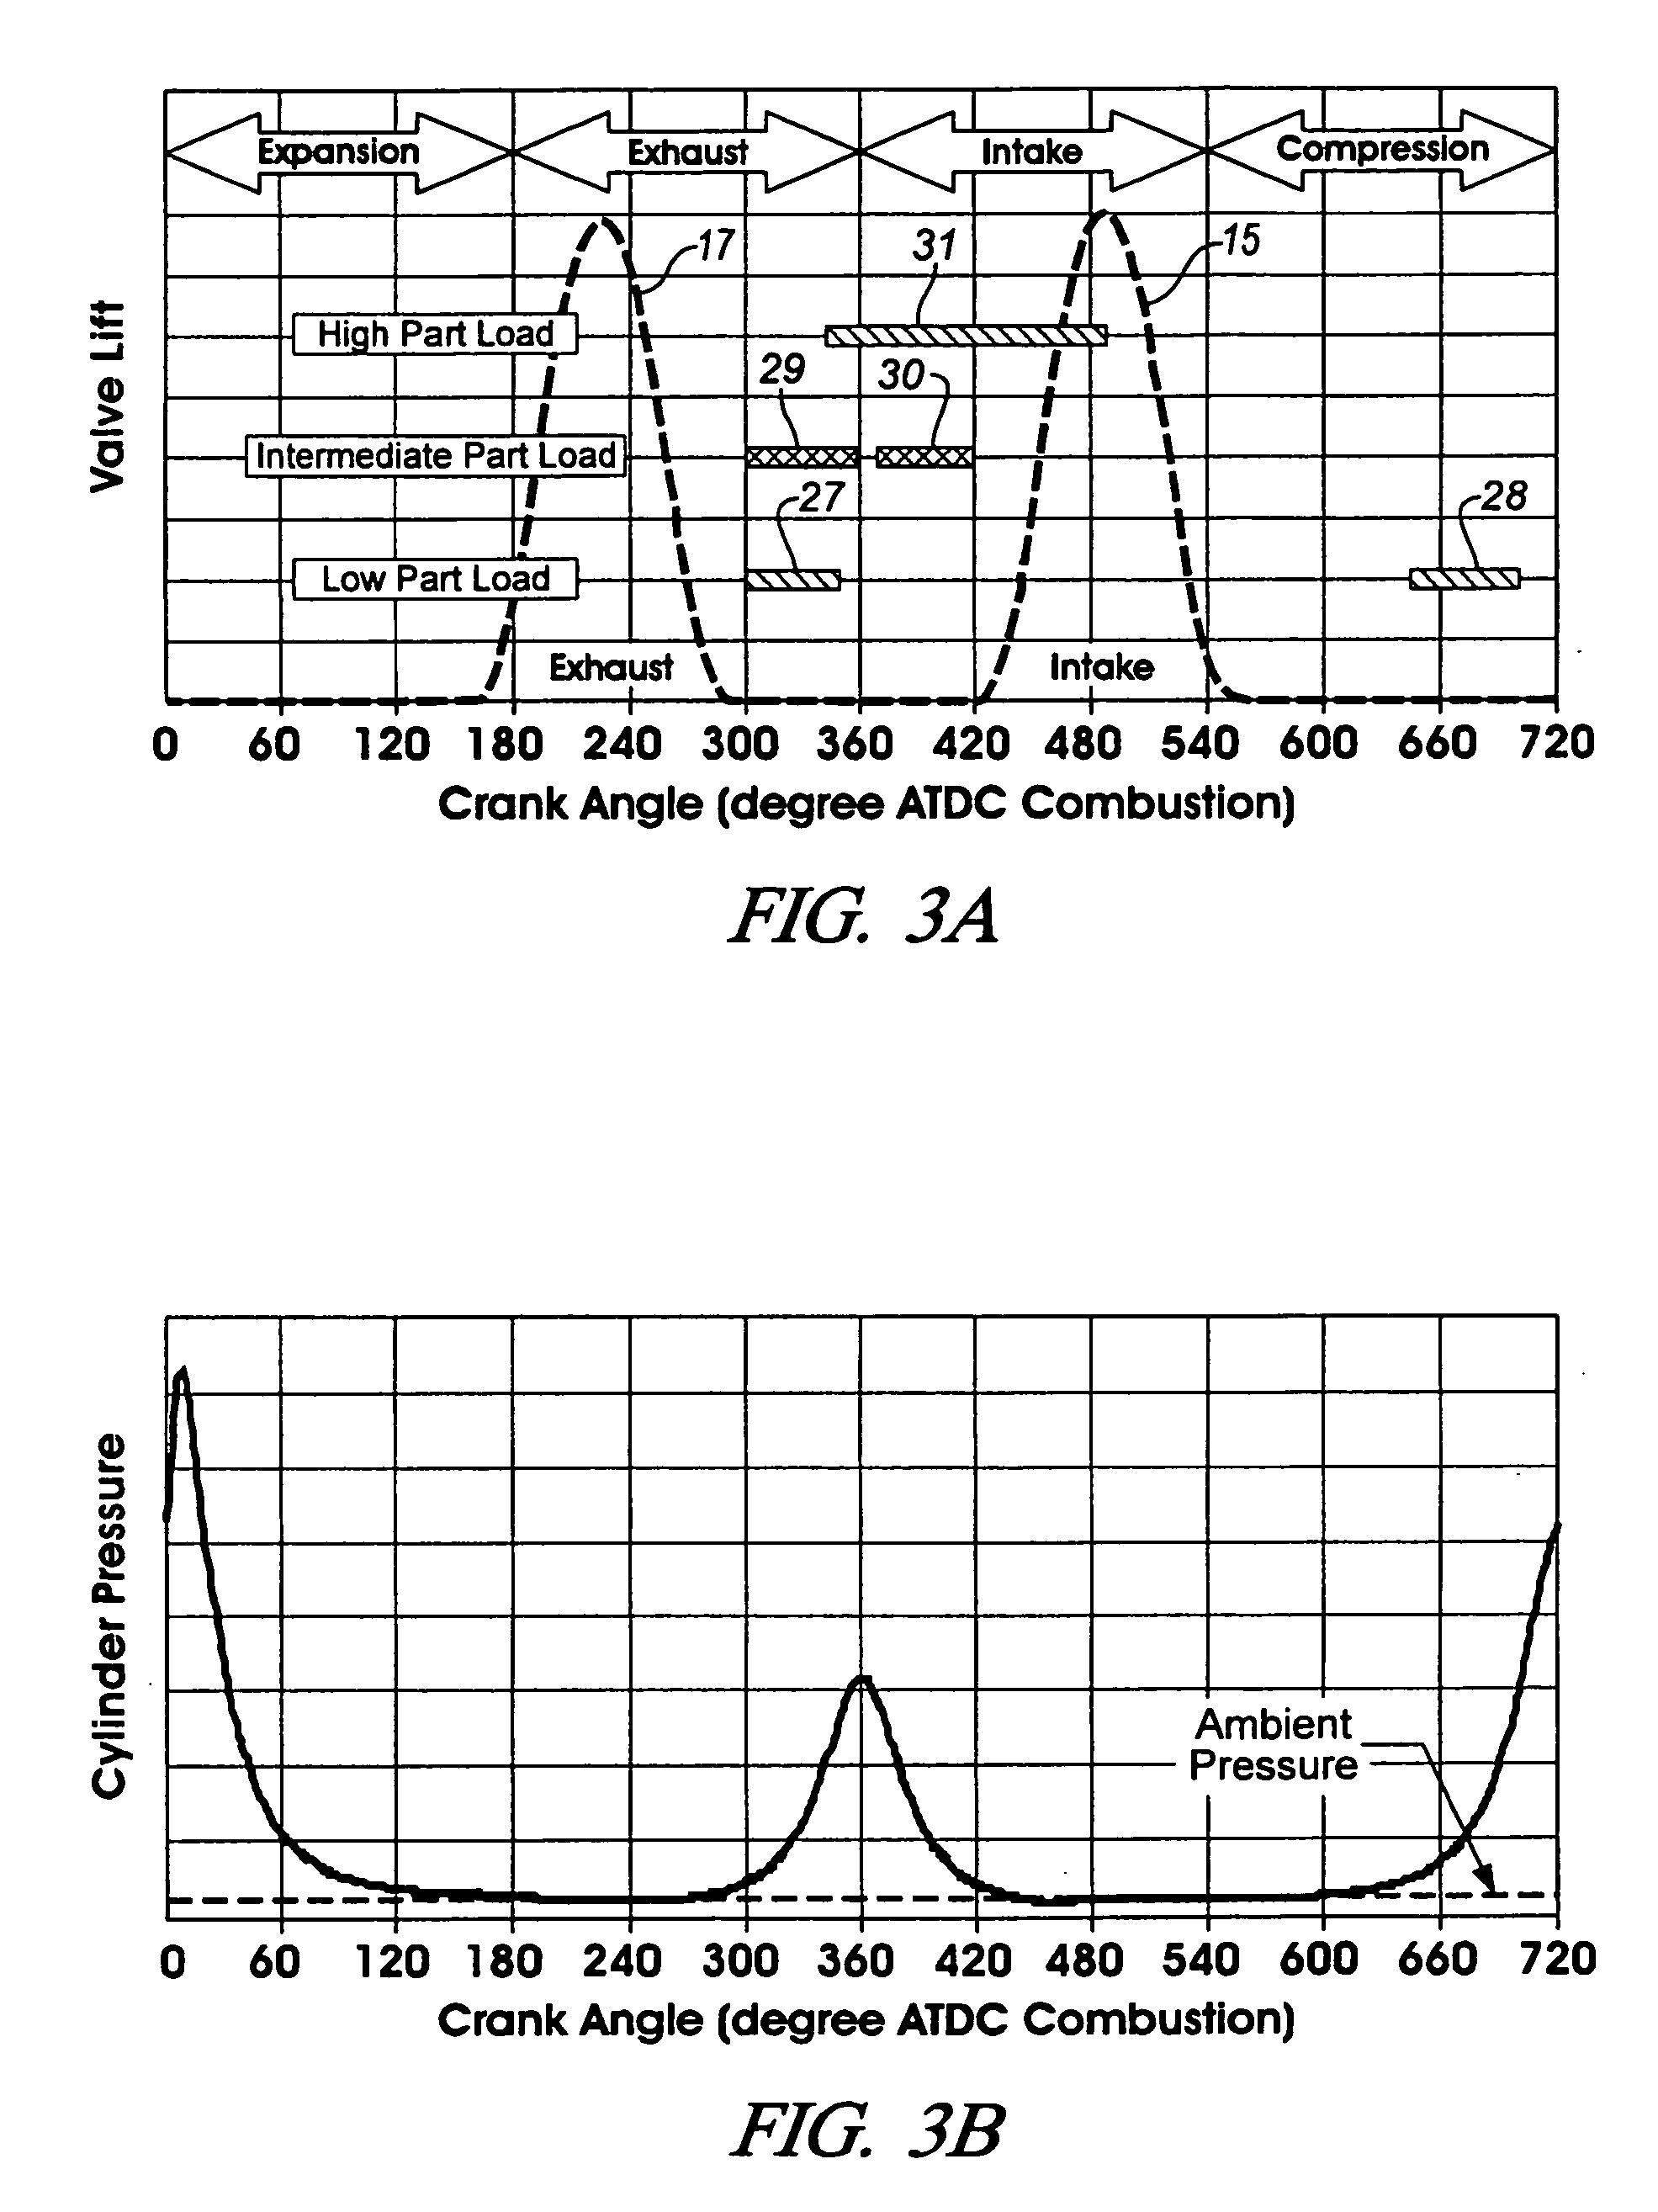 Method for load transient control between lean and stoichiometric combustion modes of direct-injection engines with controlled auto-ignition combustion